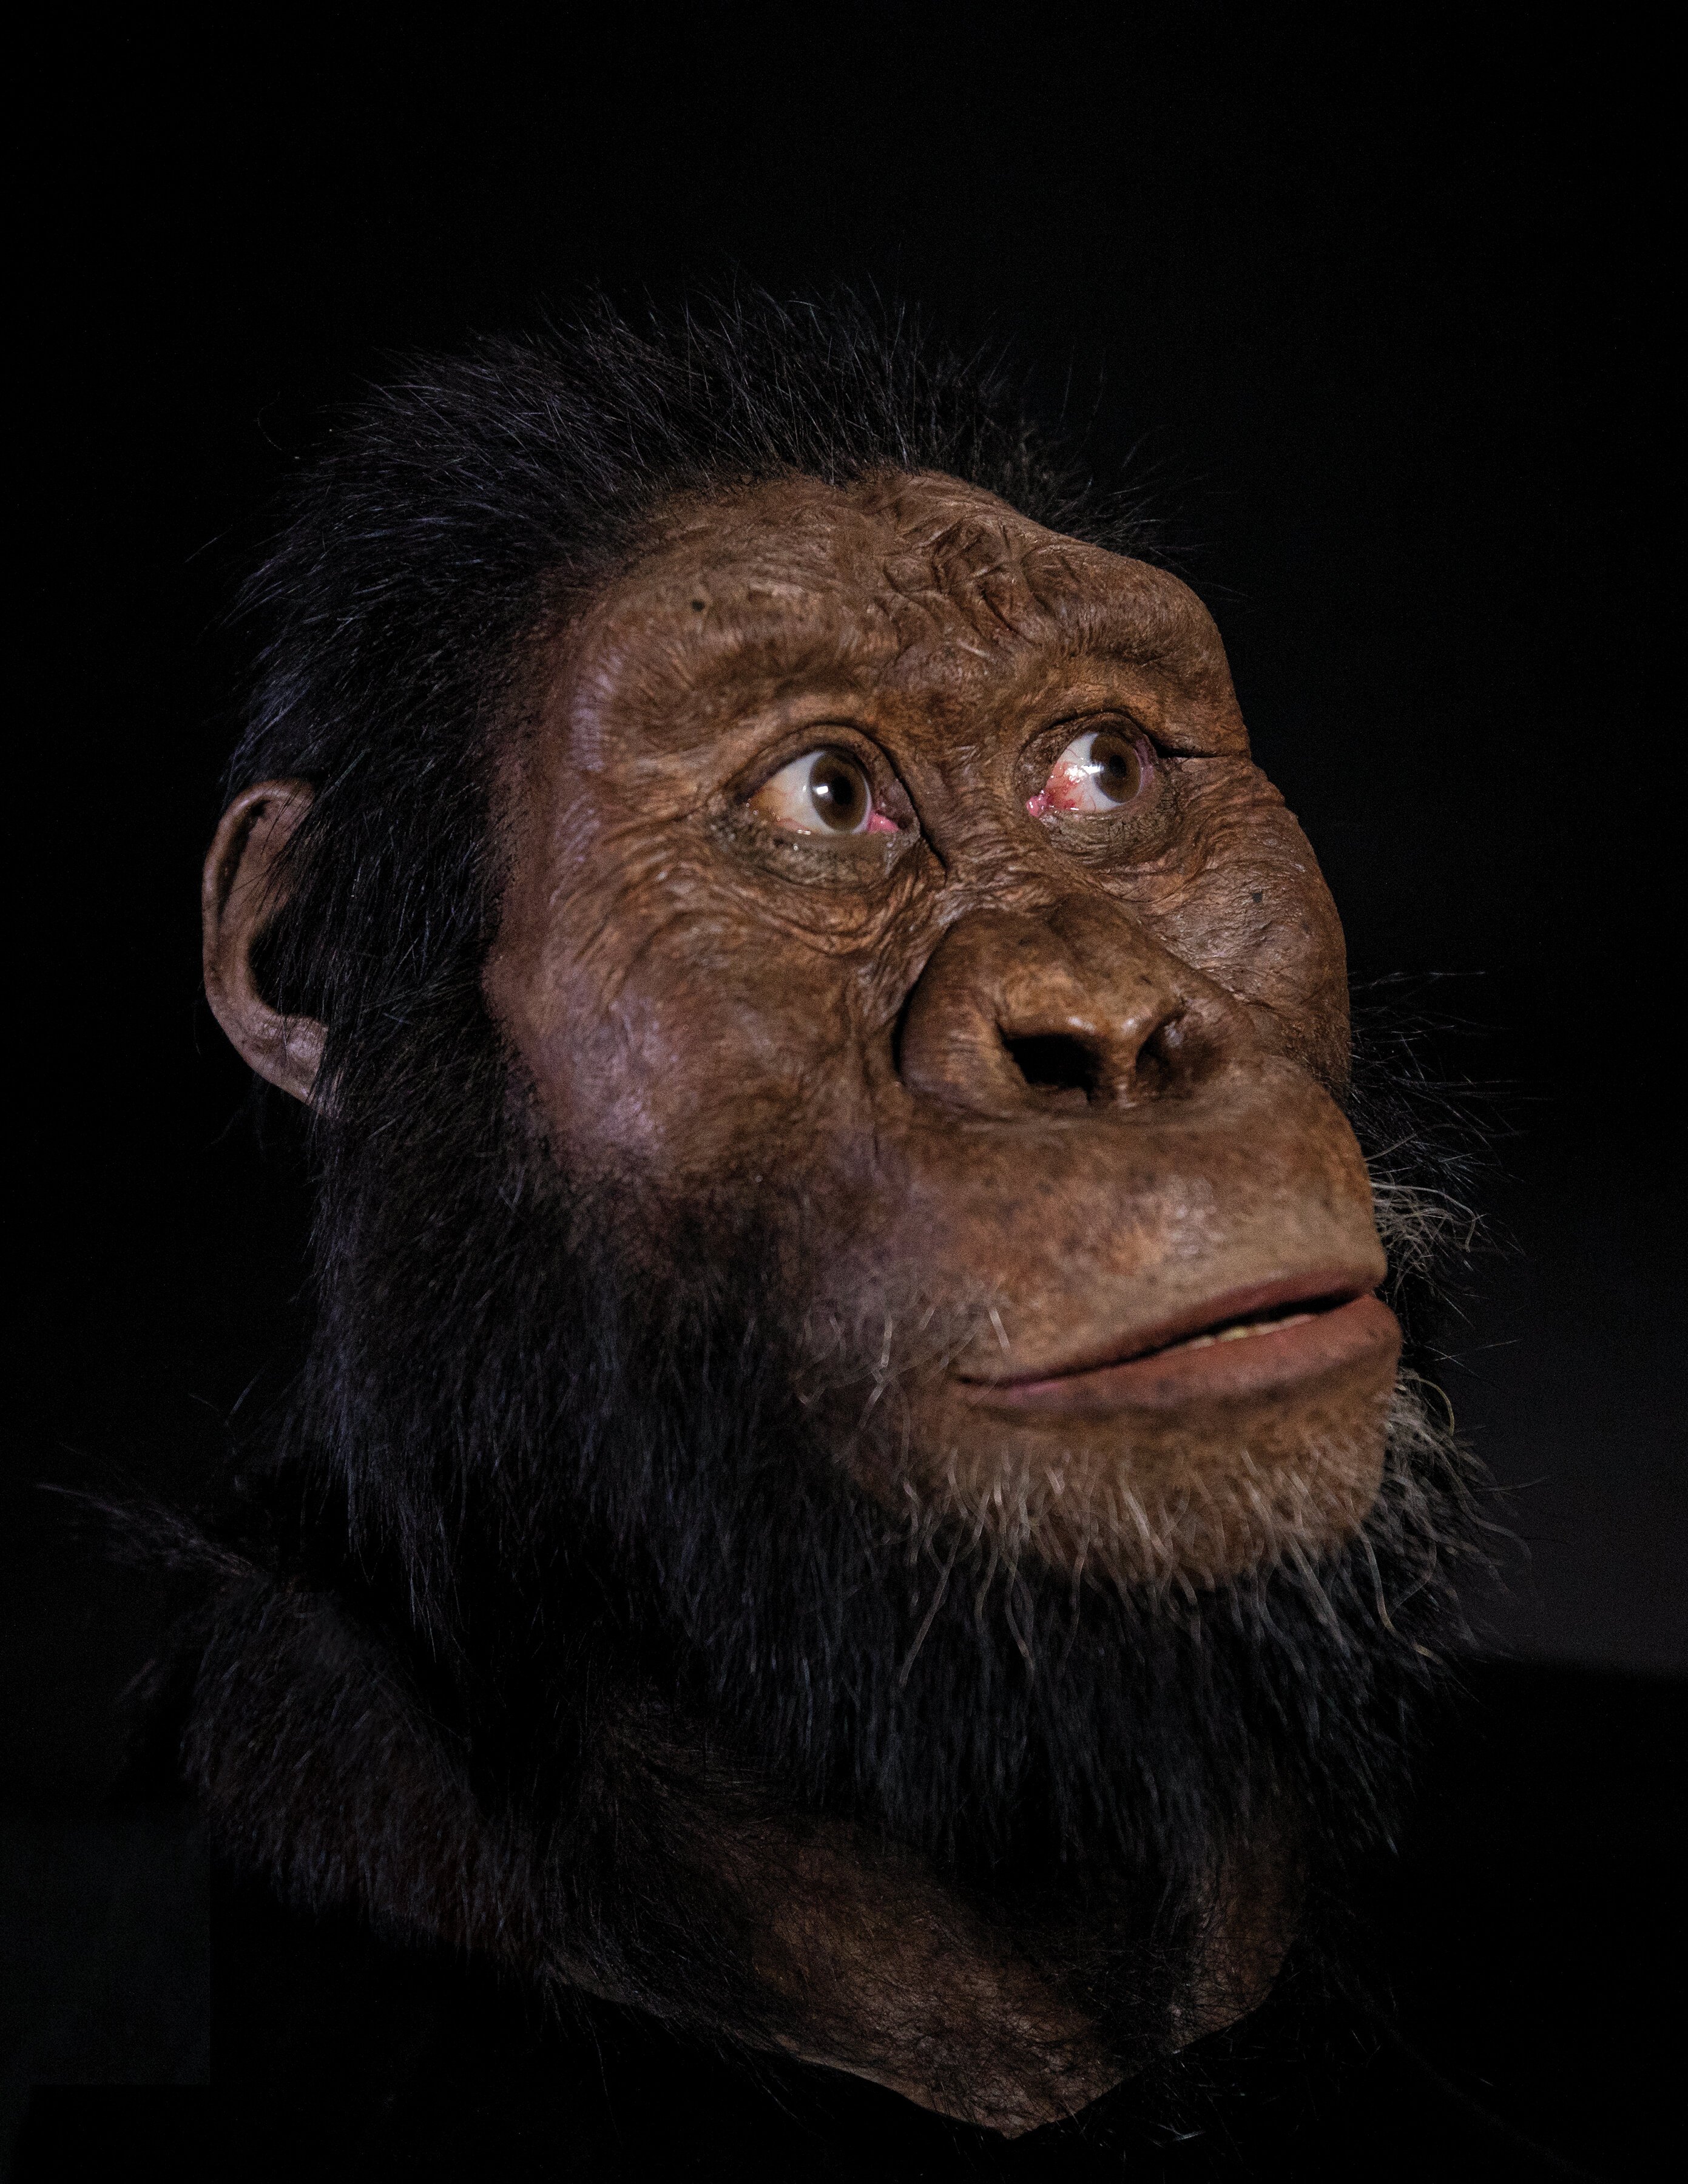 A 3.8 million year old fossil from Ethiopia reveals the face of Lucys ancestor